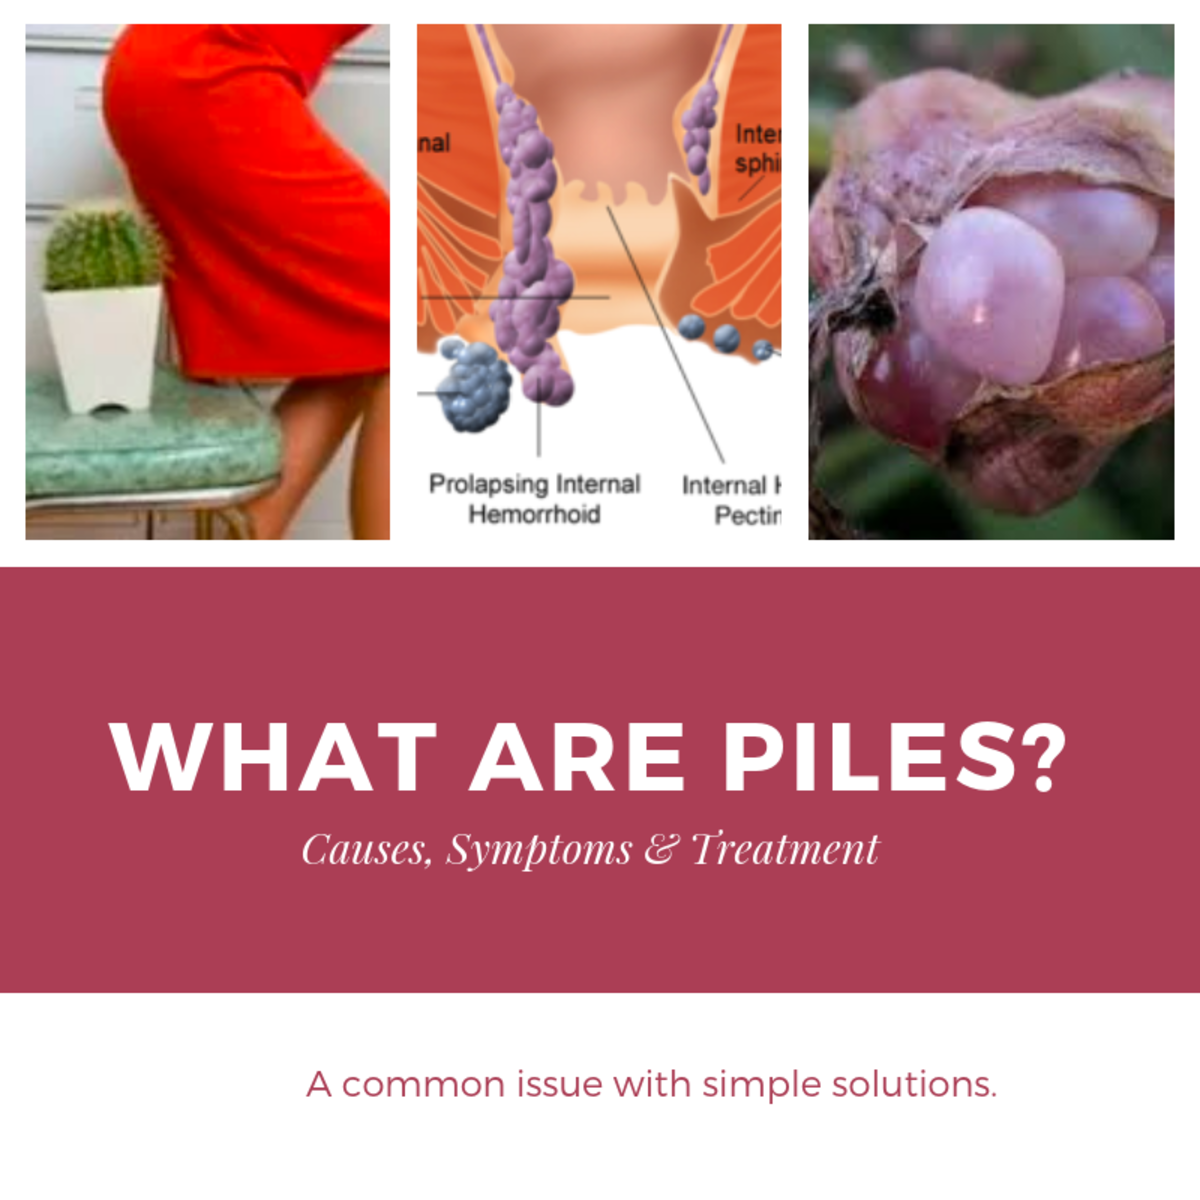 What Are Piles? Causes and Treatment